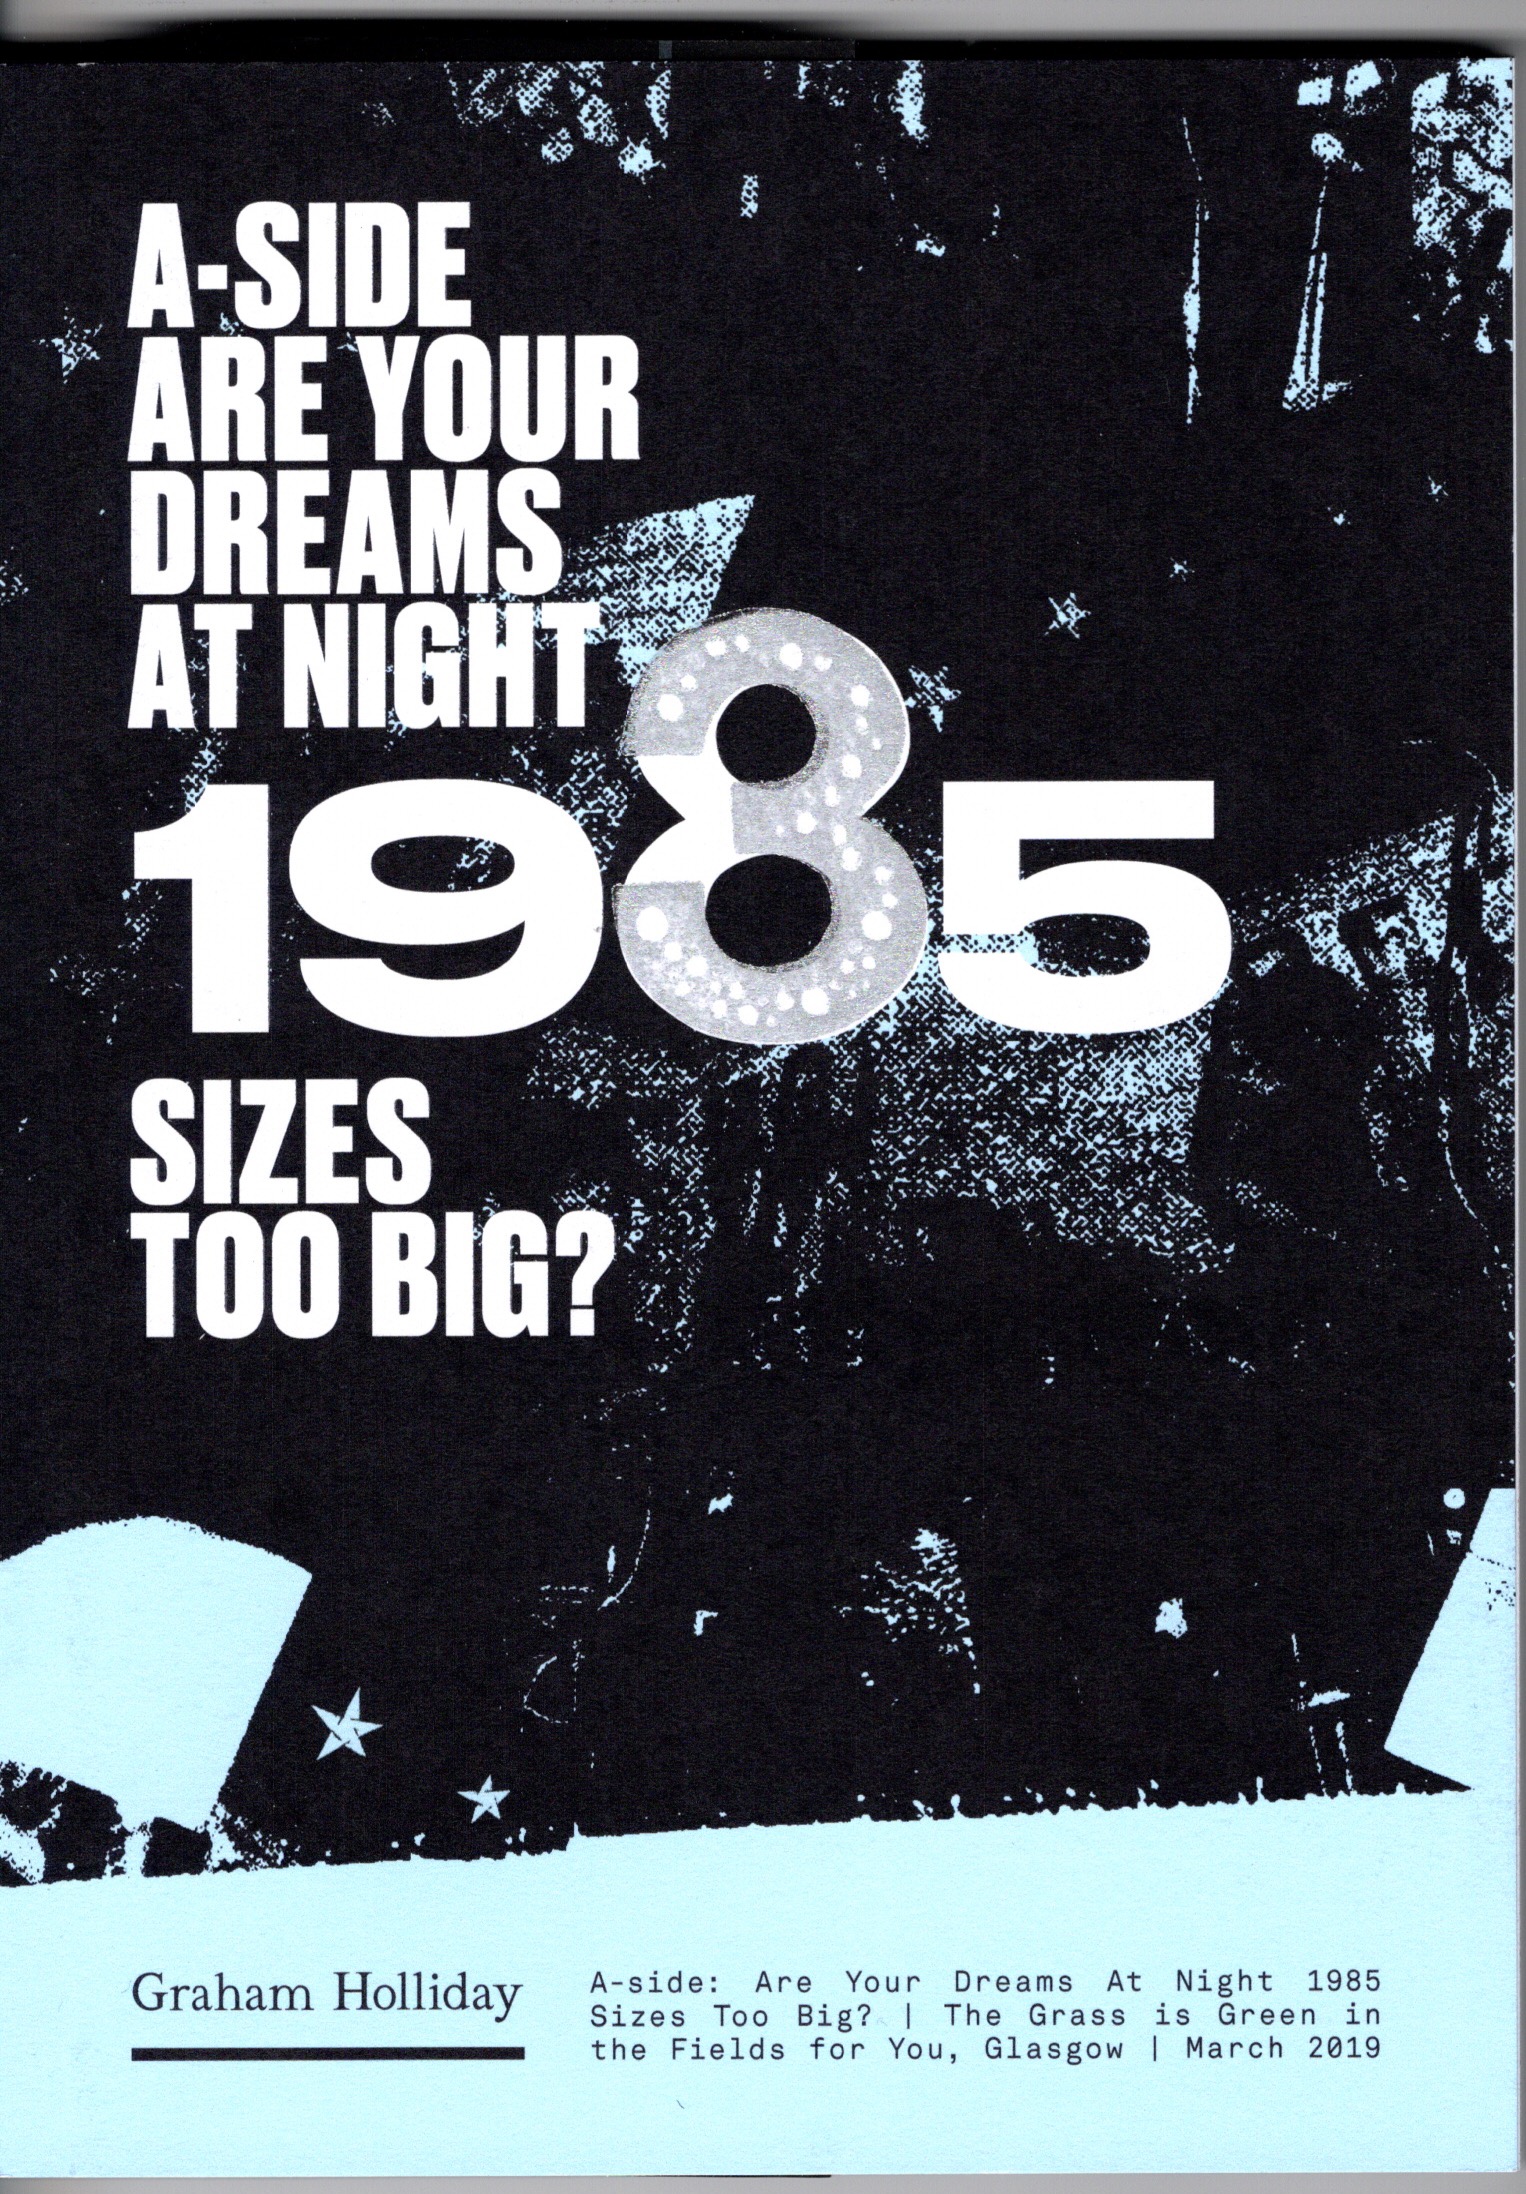 GRAHAM HOLLIDAY – 'A-SIDE: ARE YOUR DREAMS AT NIGHT 1985 SIZE TOO